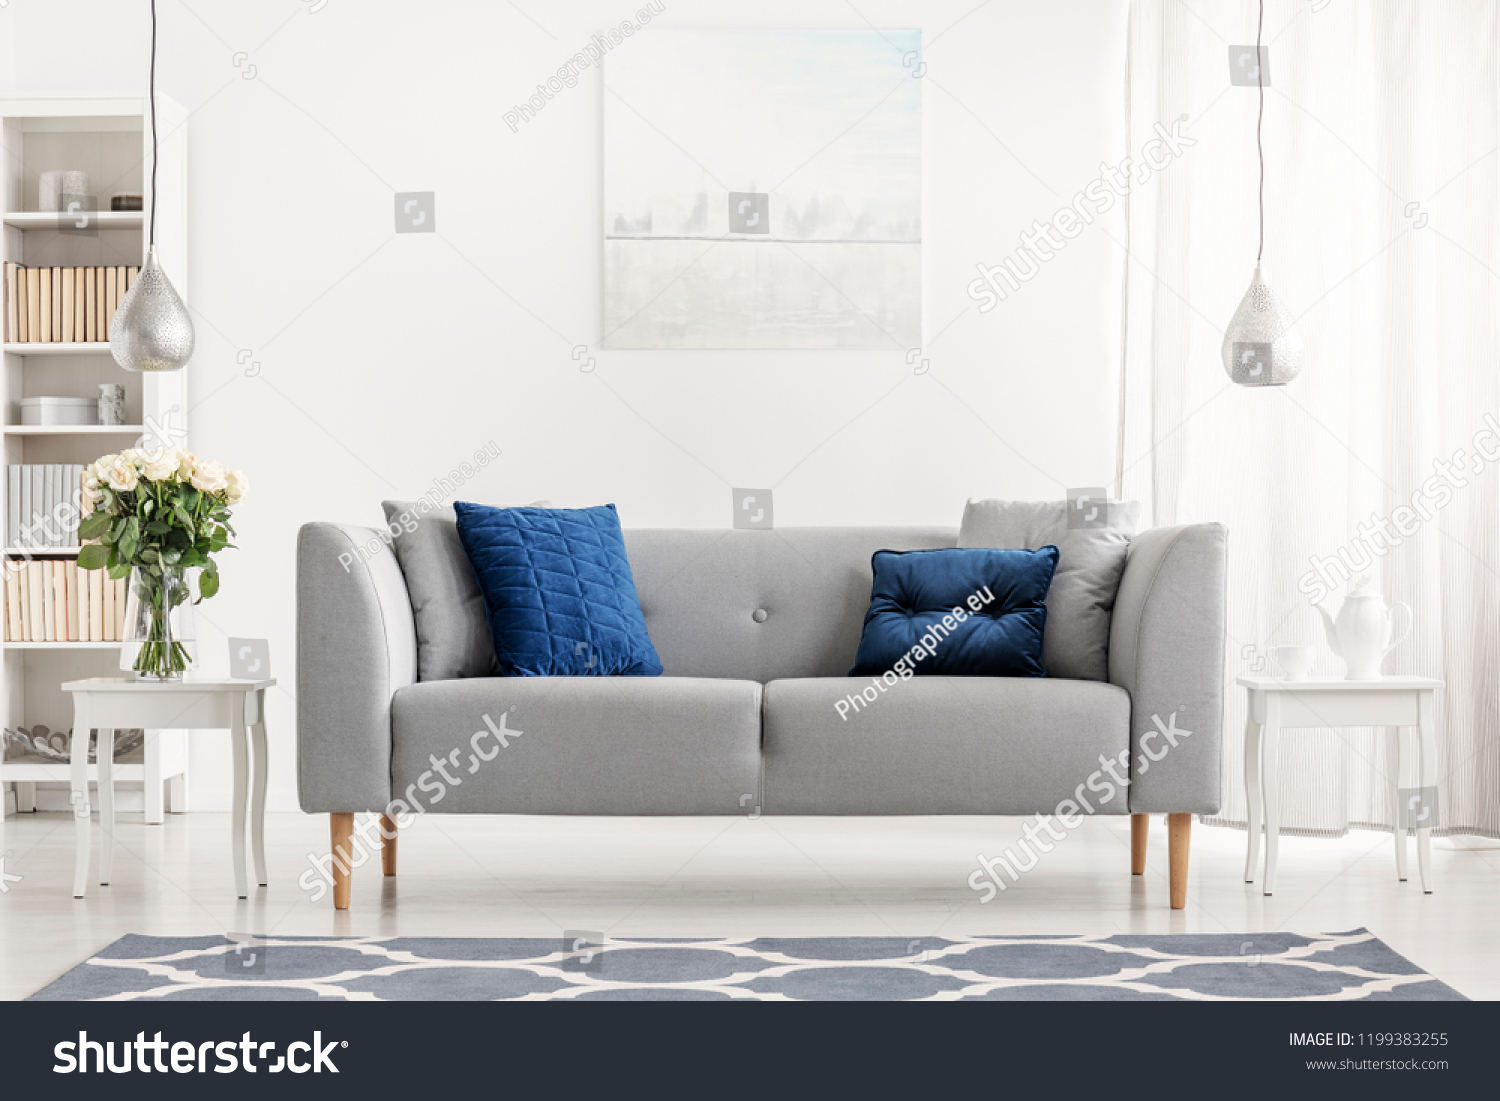 pillows for a grey couch